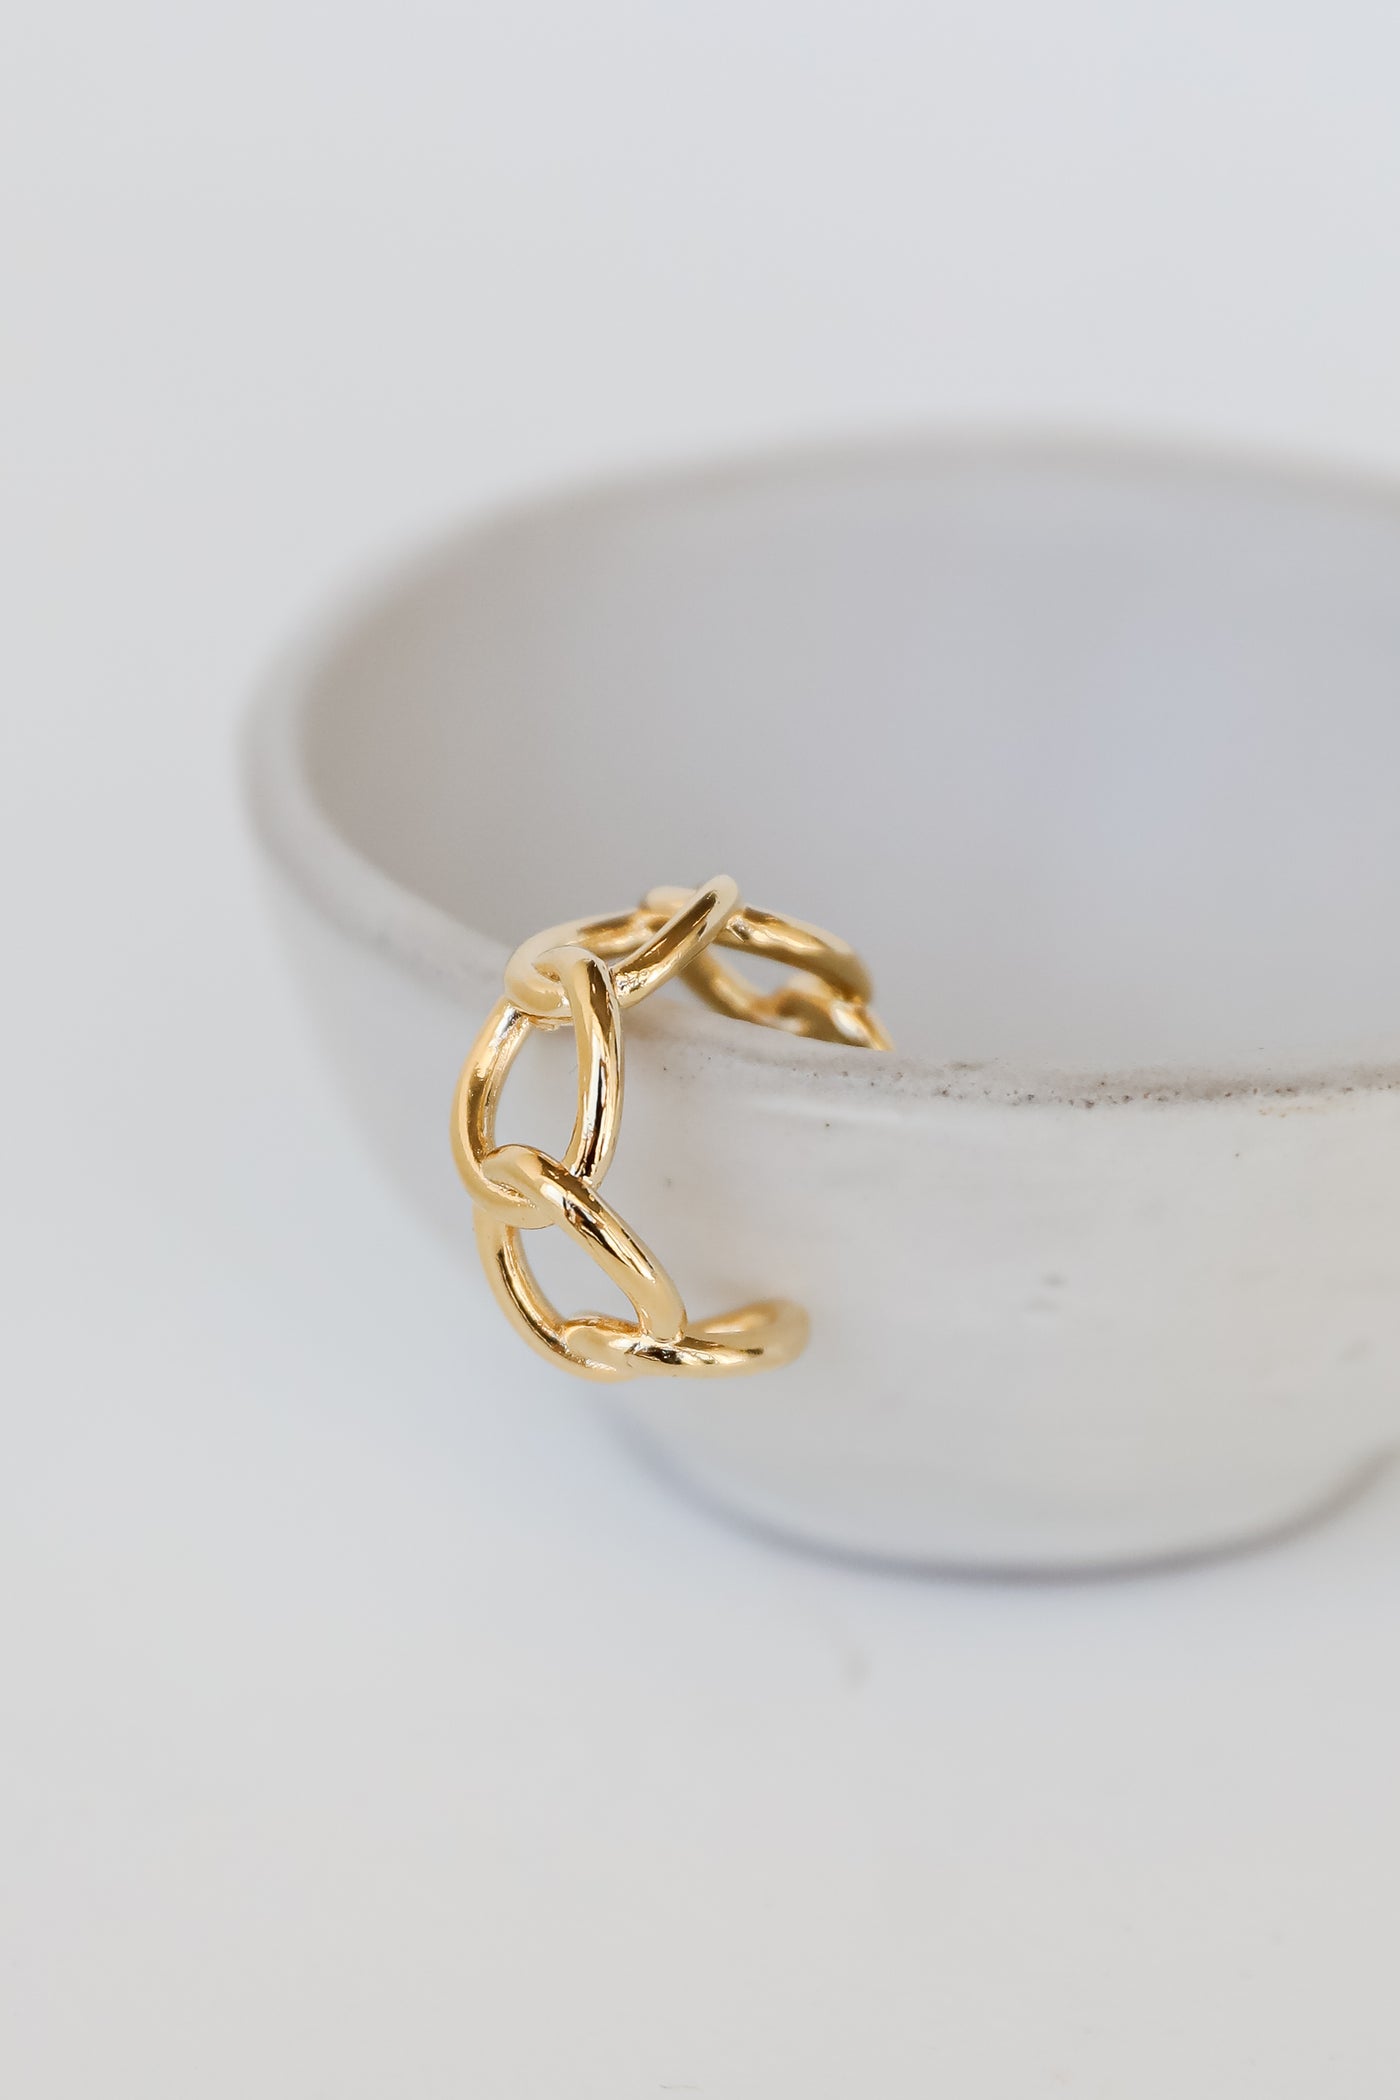 Gold Chainlink Ring close up